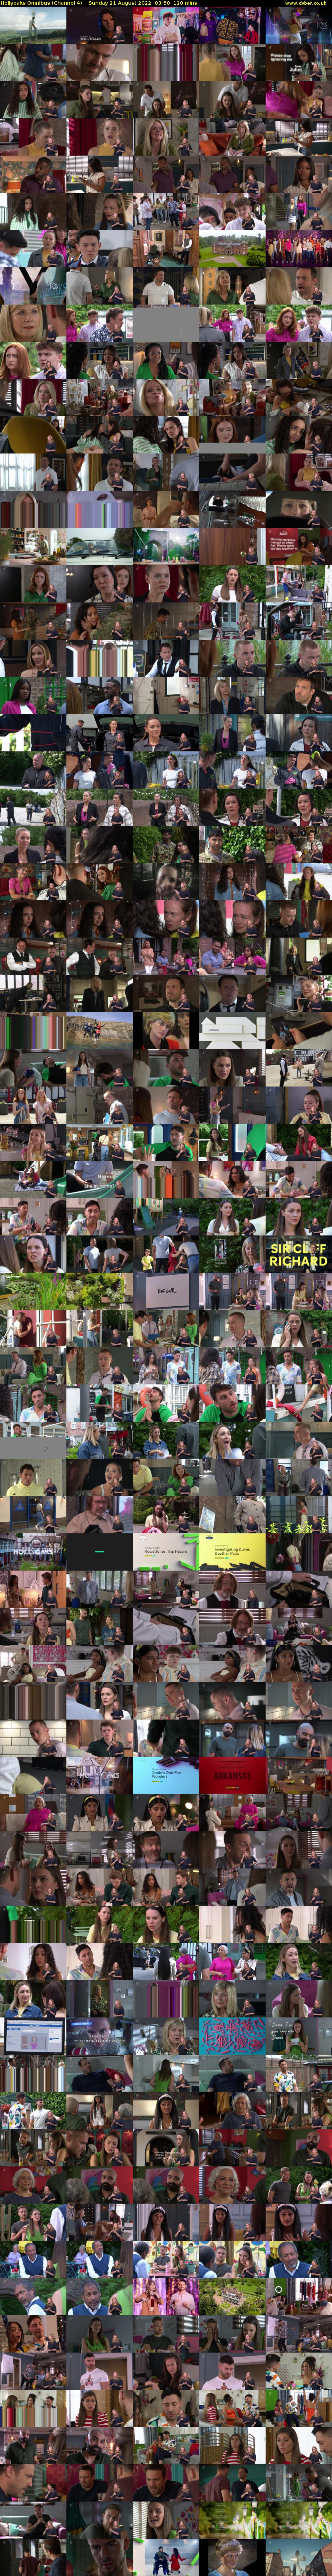 Hollyoaks Omnibus (Channel 4) Sunday 21 August 2022 03:50 - 05:50